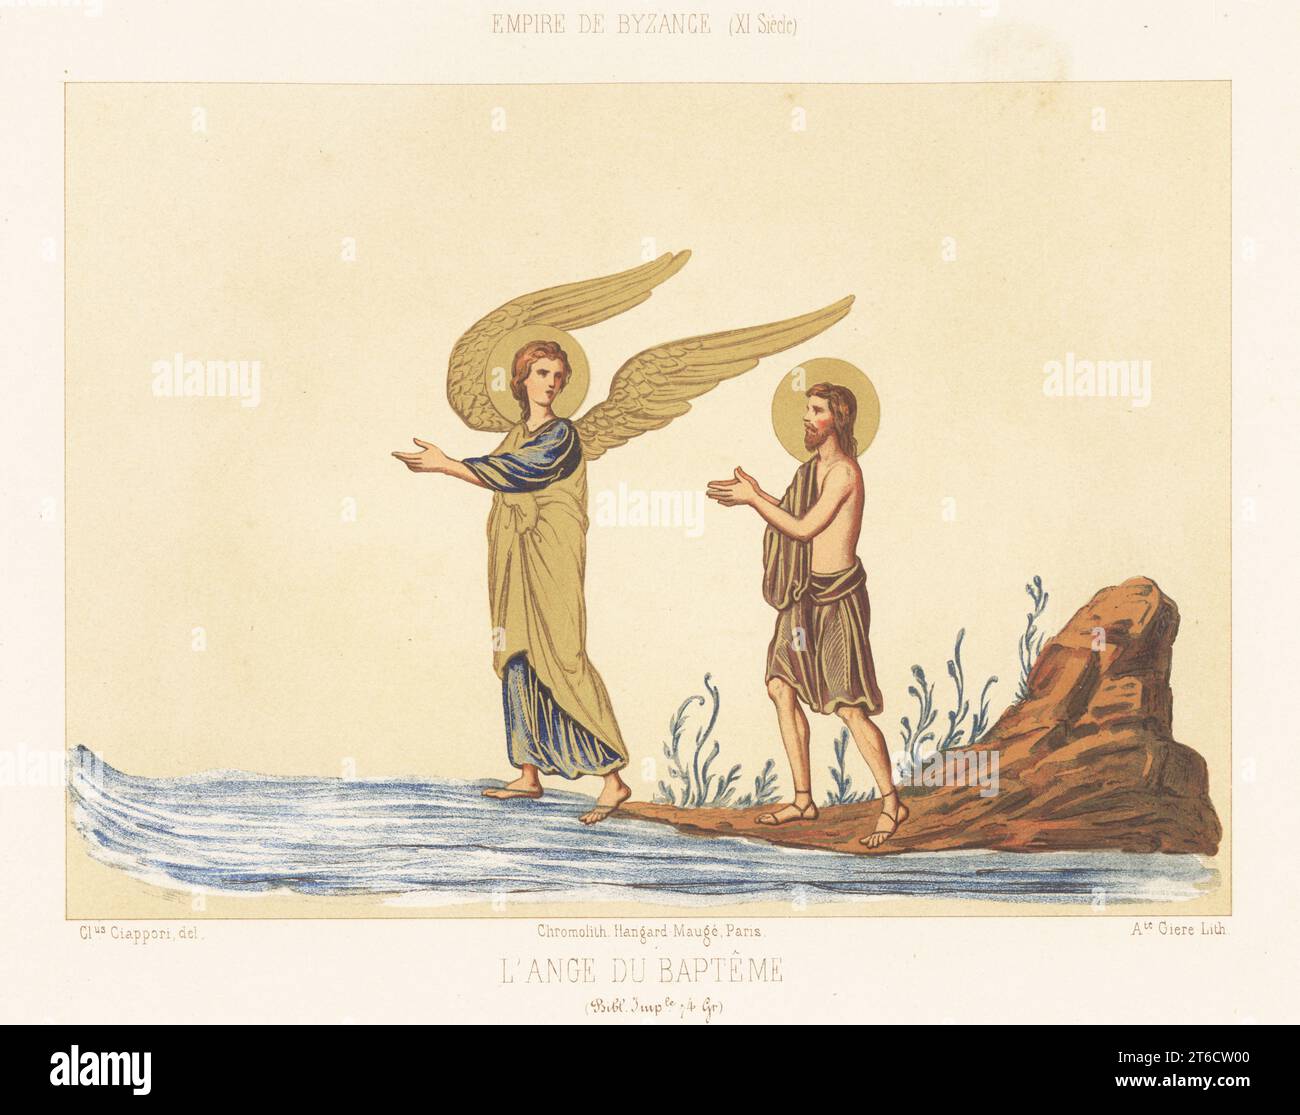 Jesus Christ baptized by an angel in Byzantine costumes, 11th century. From a manuscript Gospels, MS 74 G, Bibliotheque Imperiale. L'ange du bapteme, Empire de Byzance, XIe siecle. Chromolithograph by Giare after an illustration by Claudius Joseph Ciappori from Charles Louandres Les Arts Somptuaires, The Sumptuary Arts, Hangard-Mauge, Paris, 1858. Stock Photo